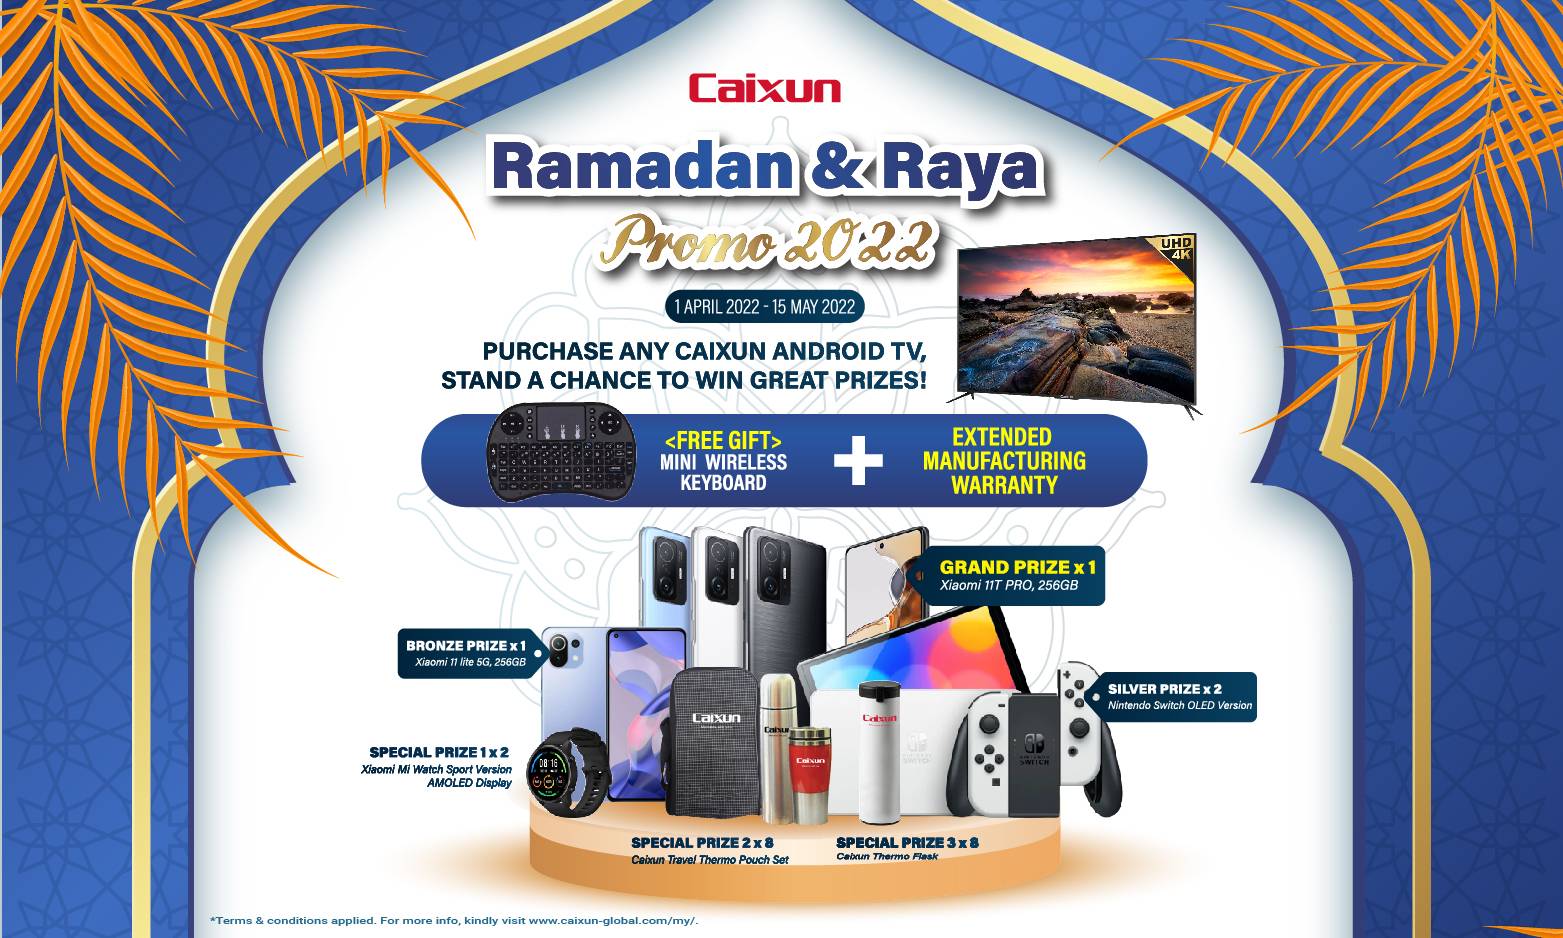 Caixun Y2022 Ramadan & Raya Promotion (How To Redeem & Campaign Full Terms and Conditions)